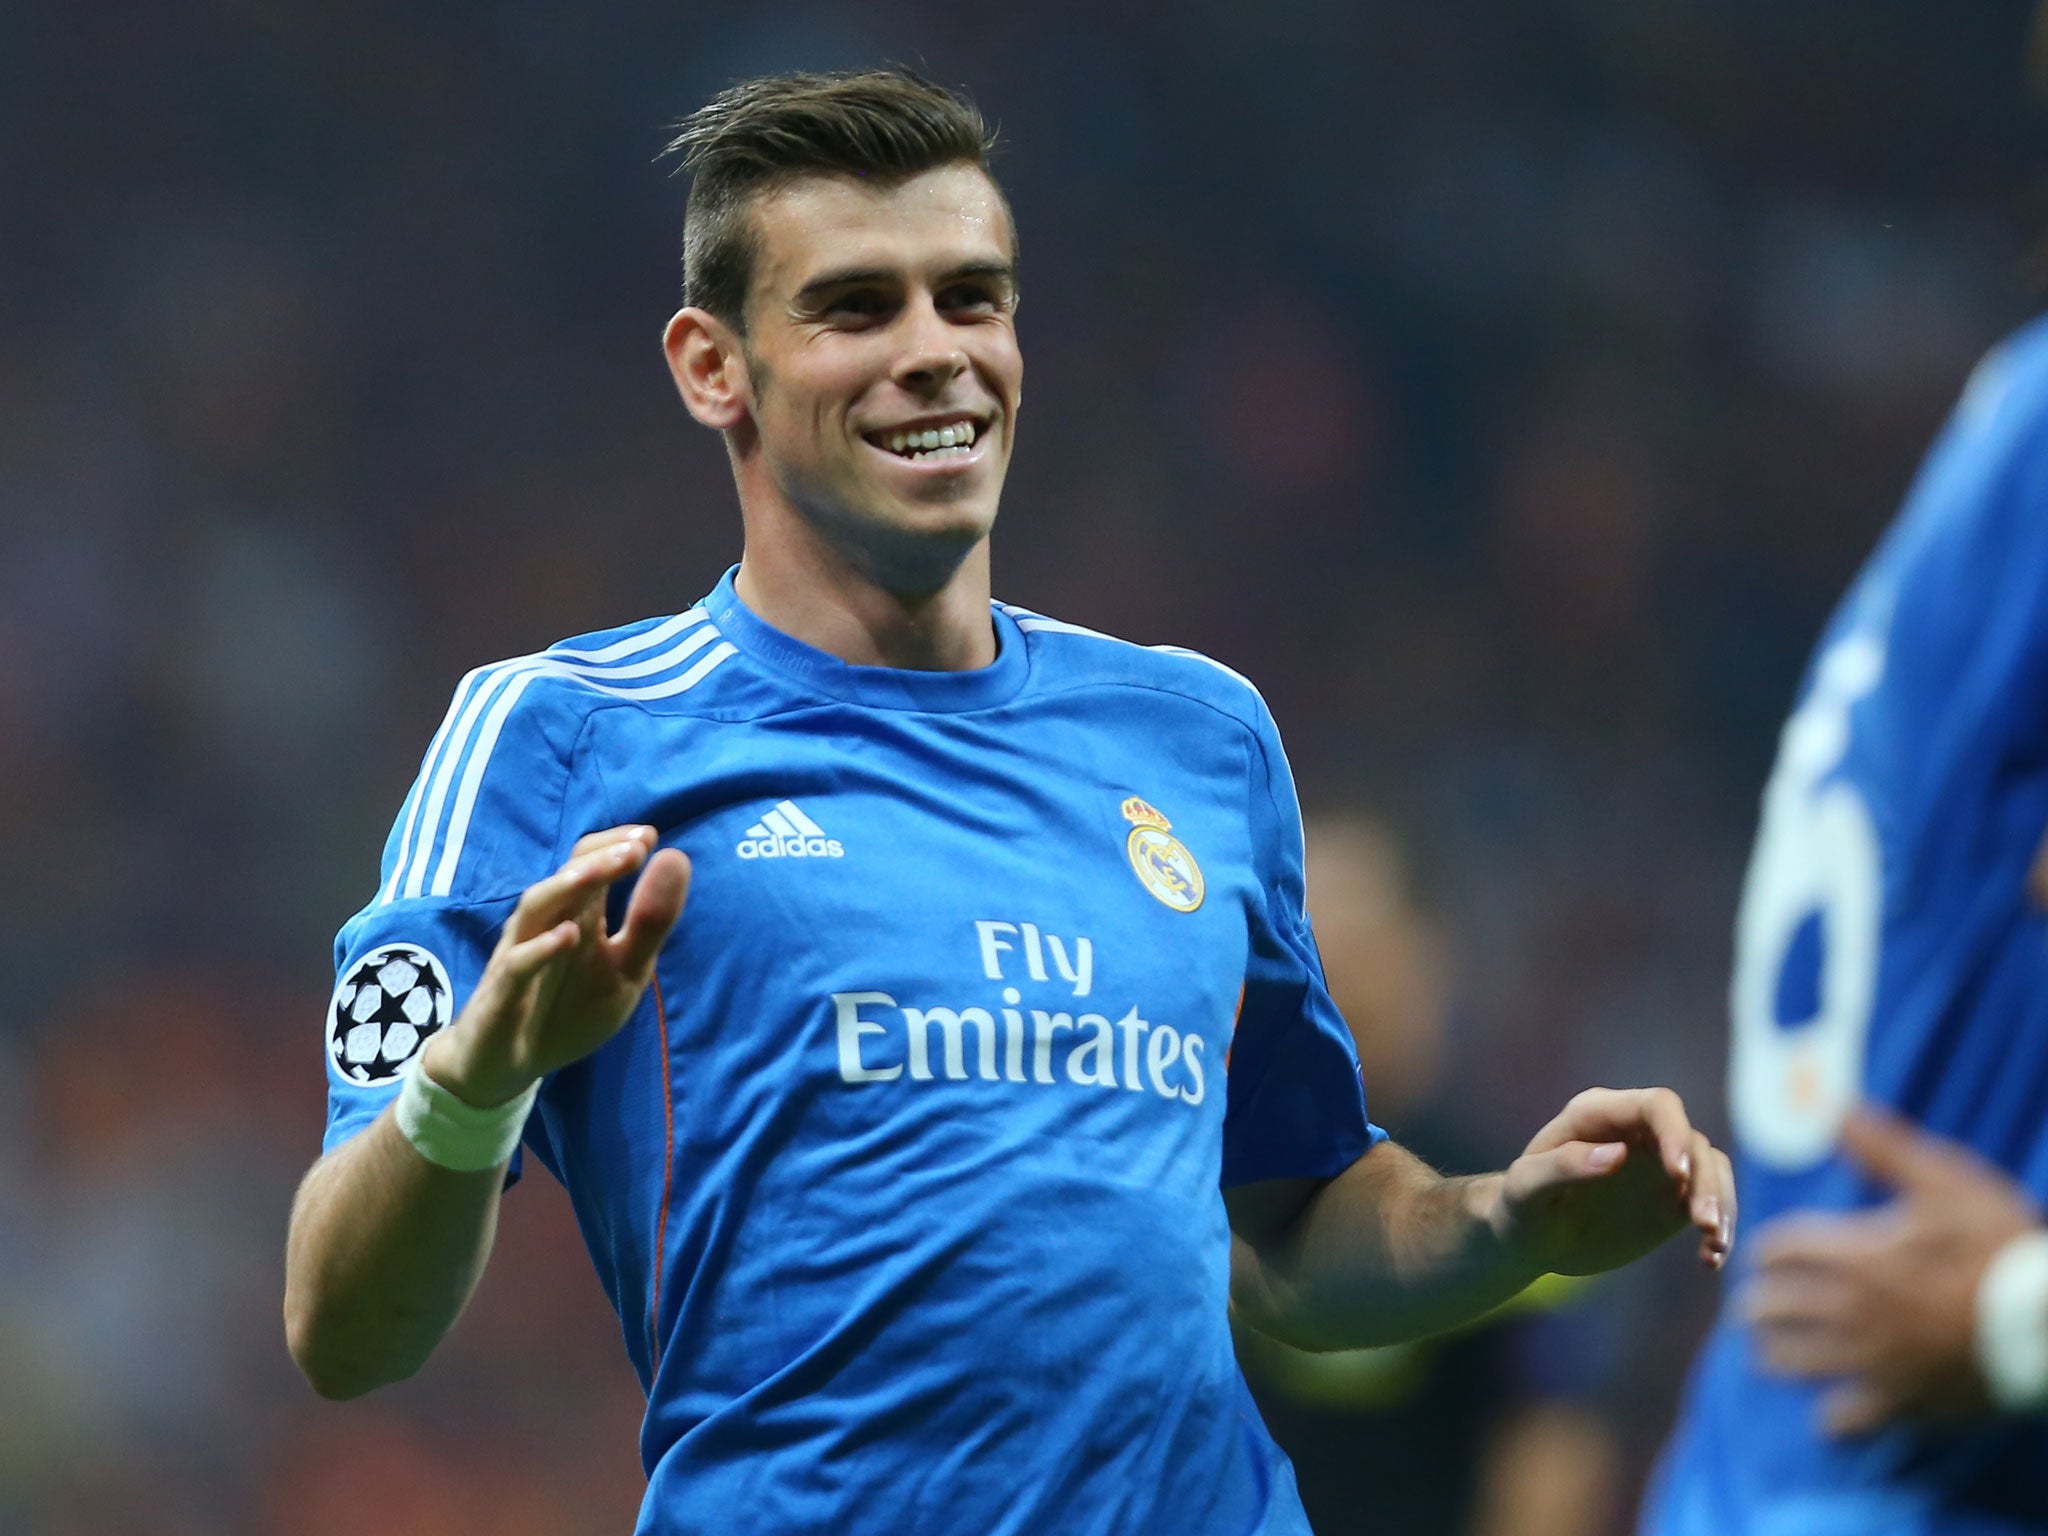 Gareth Bale celebrates after providing the assist for one of Cristiano Ronaldo's goals against Galatasaray